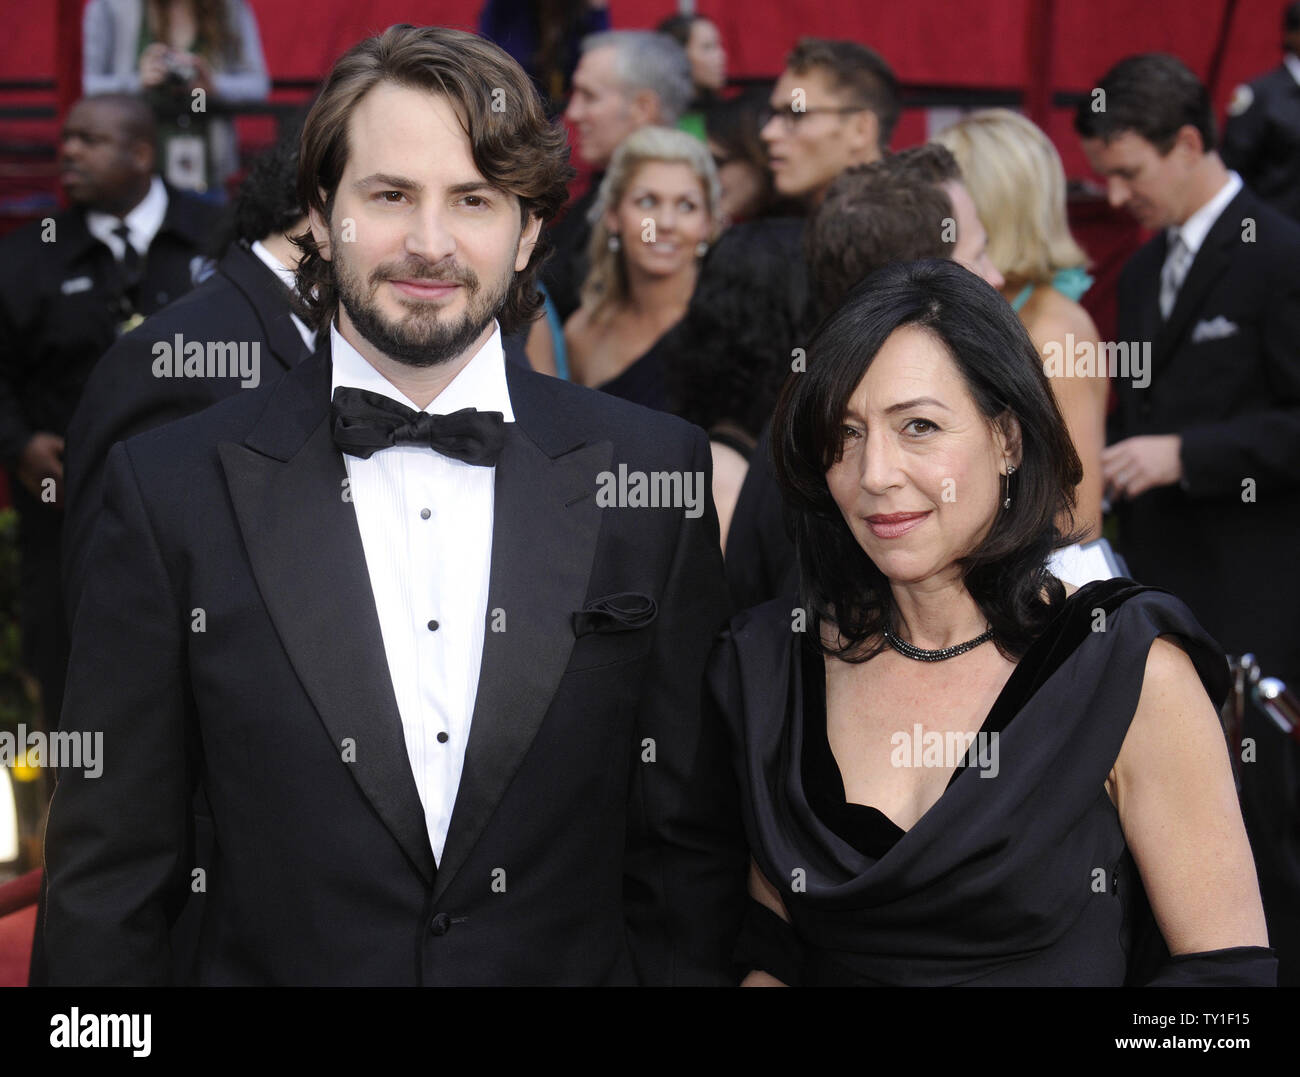 Mark Boal, screenwriter and producer of 'The Hurt Locker,' and his guest arrive at the 82nd Academy Awards in Hollywood on March 7, 2010.   UPI/Phil McCarten Stock Photo